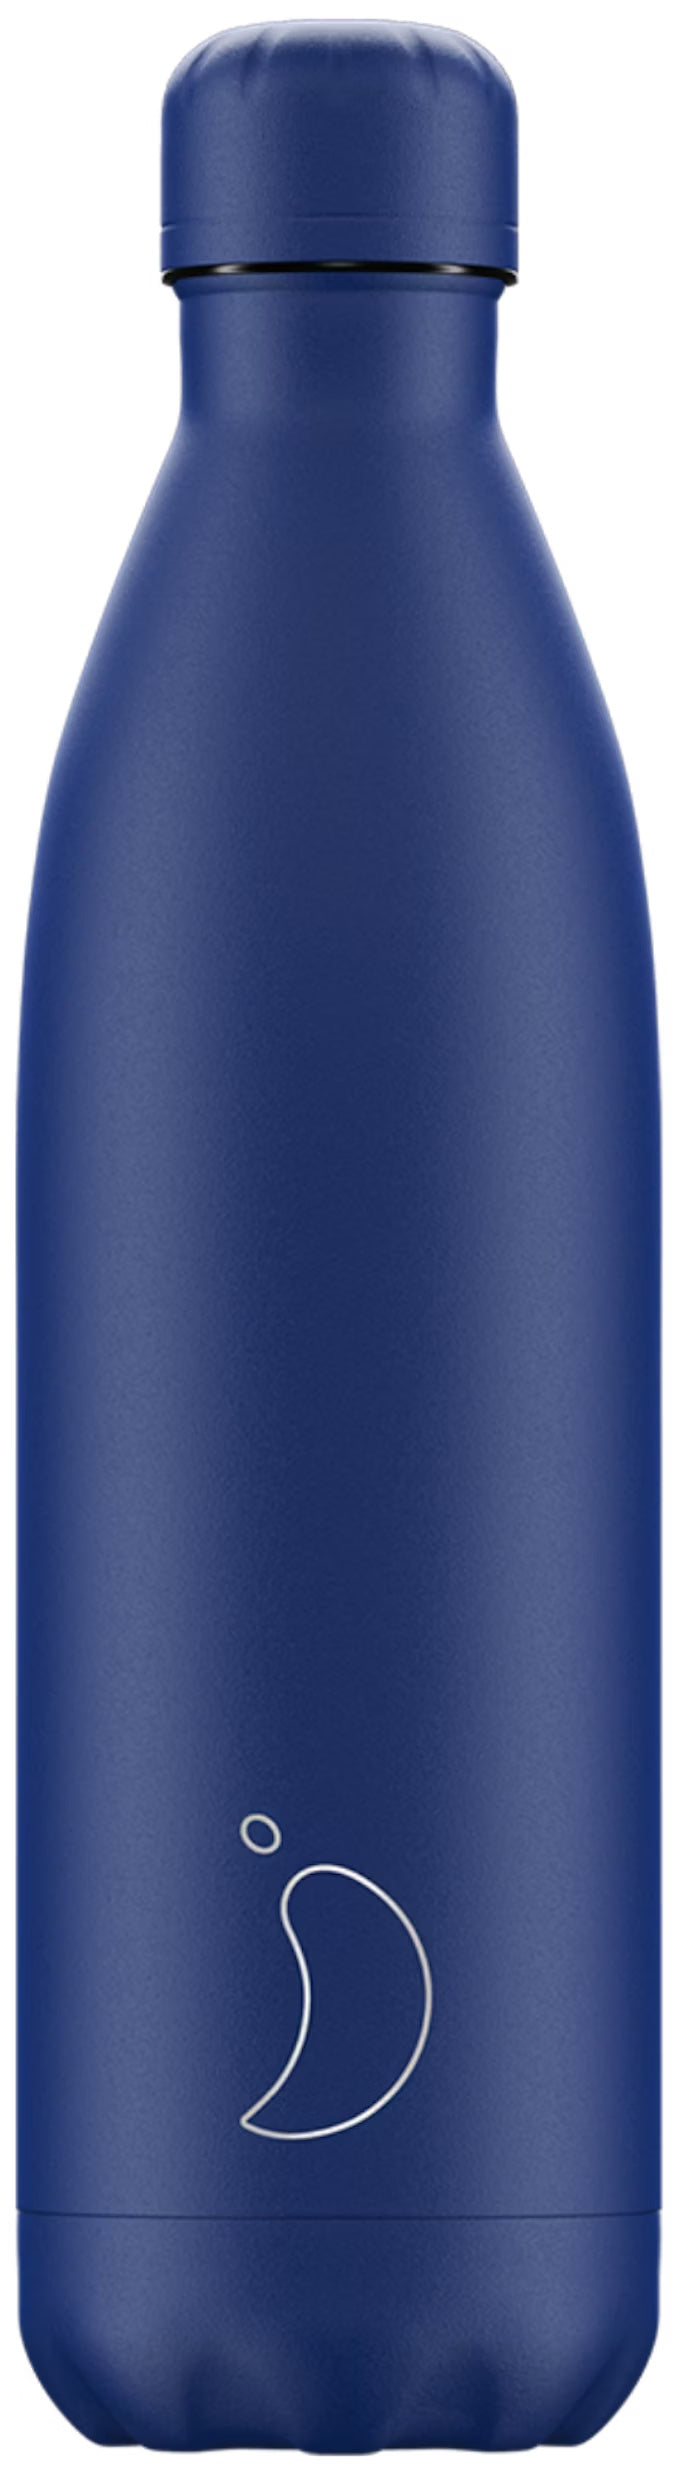 Chilly’s Bottle Matte Edition - All Blue, 750ml